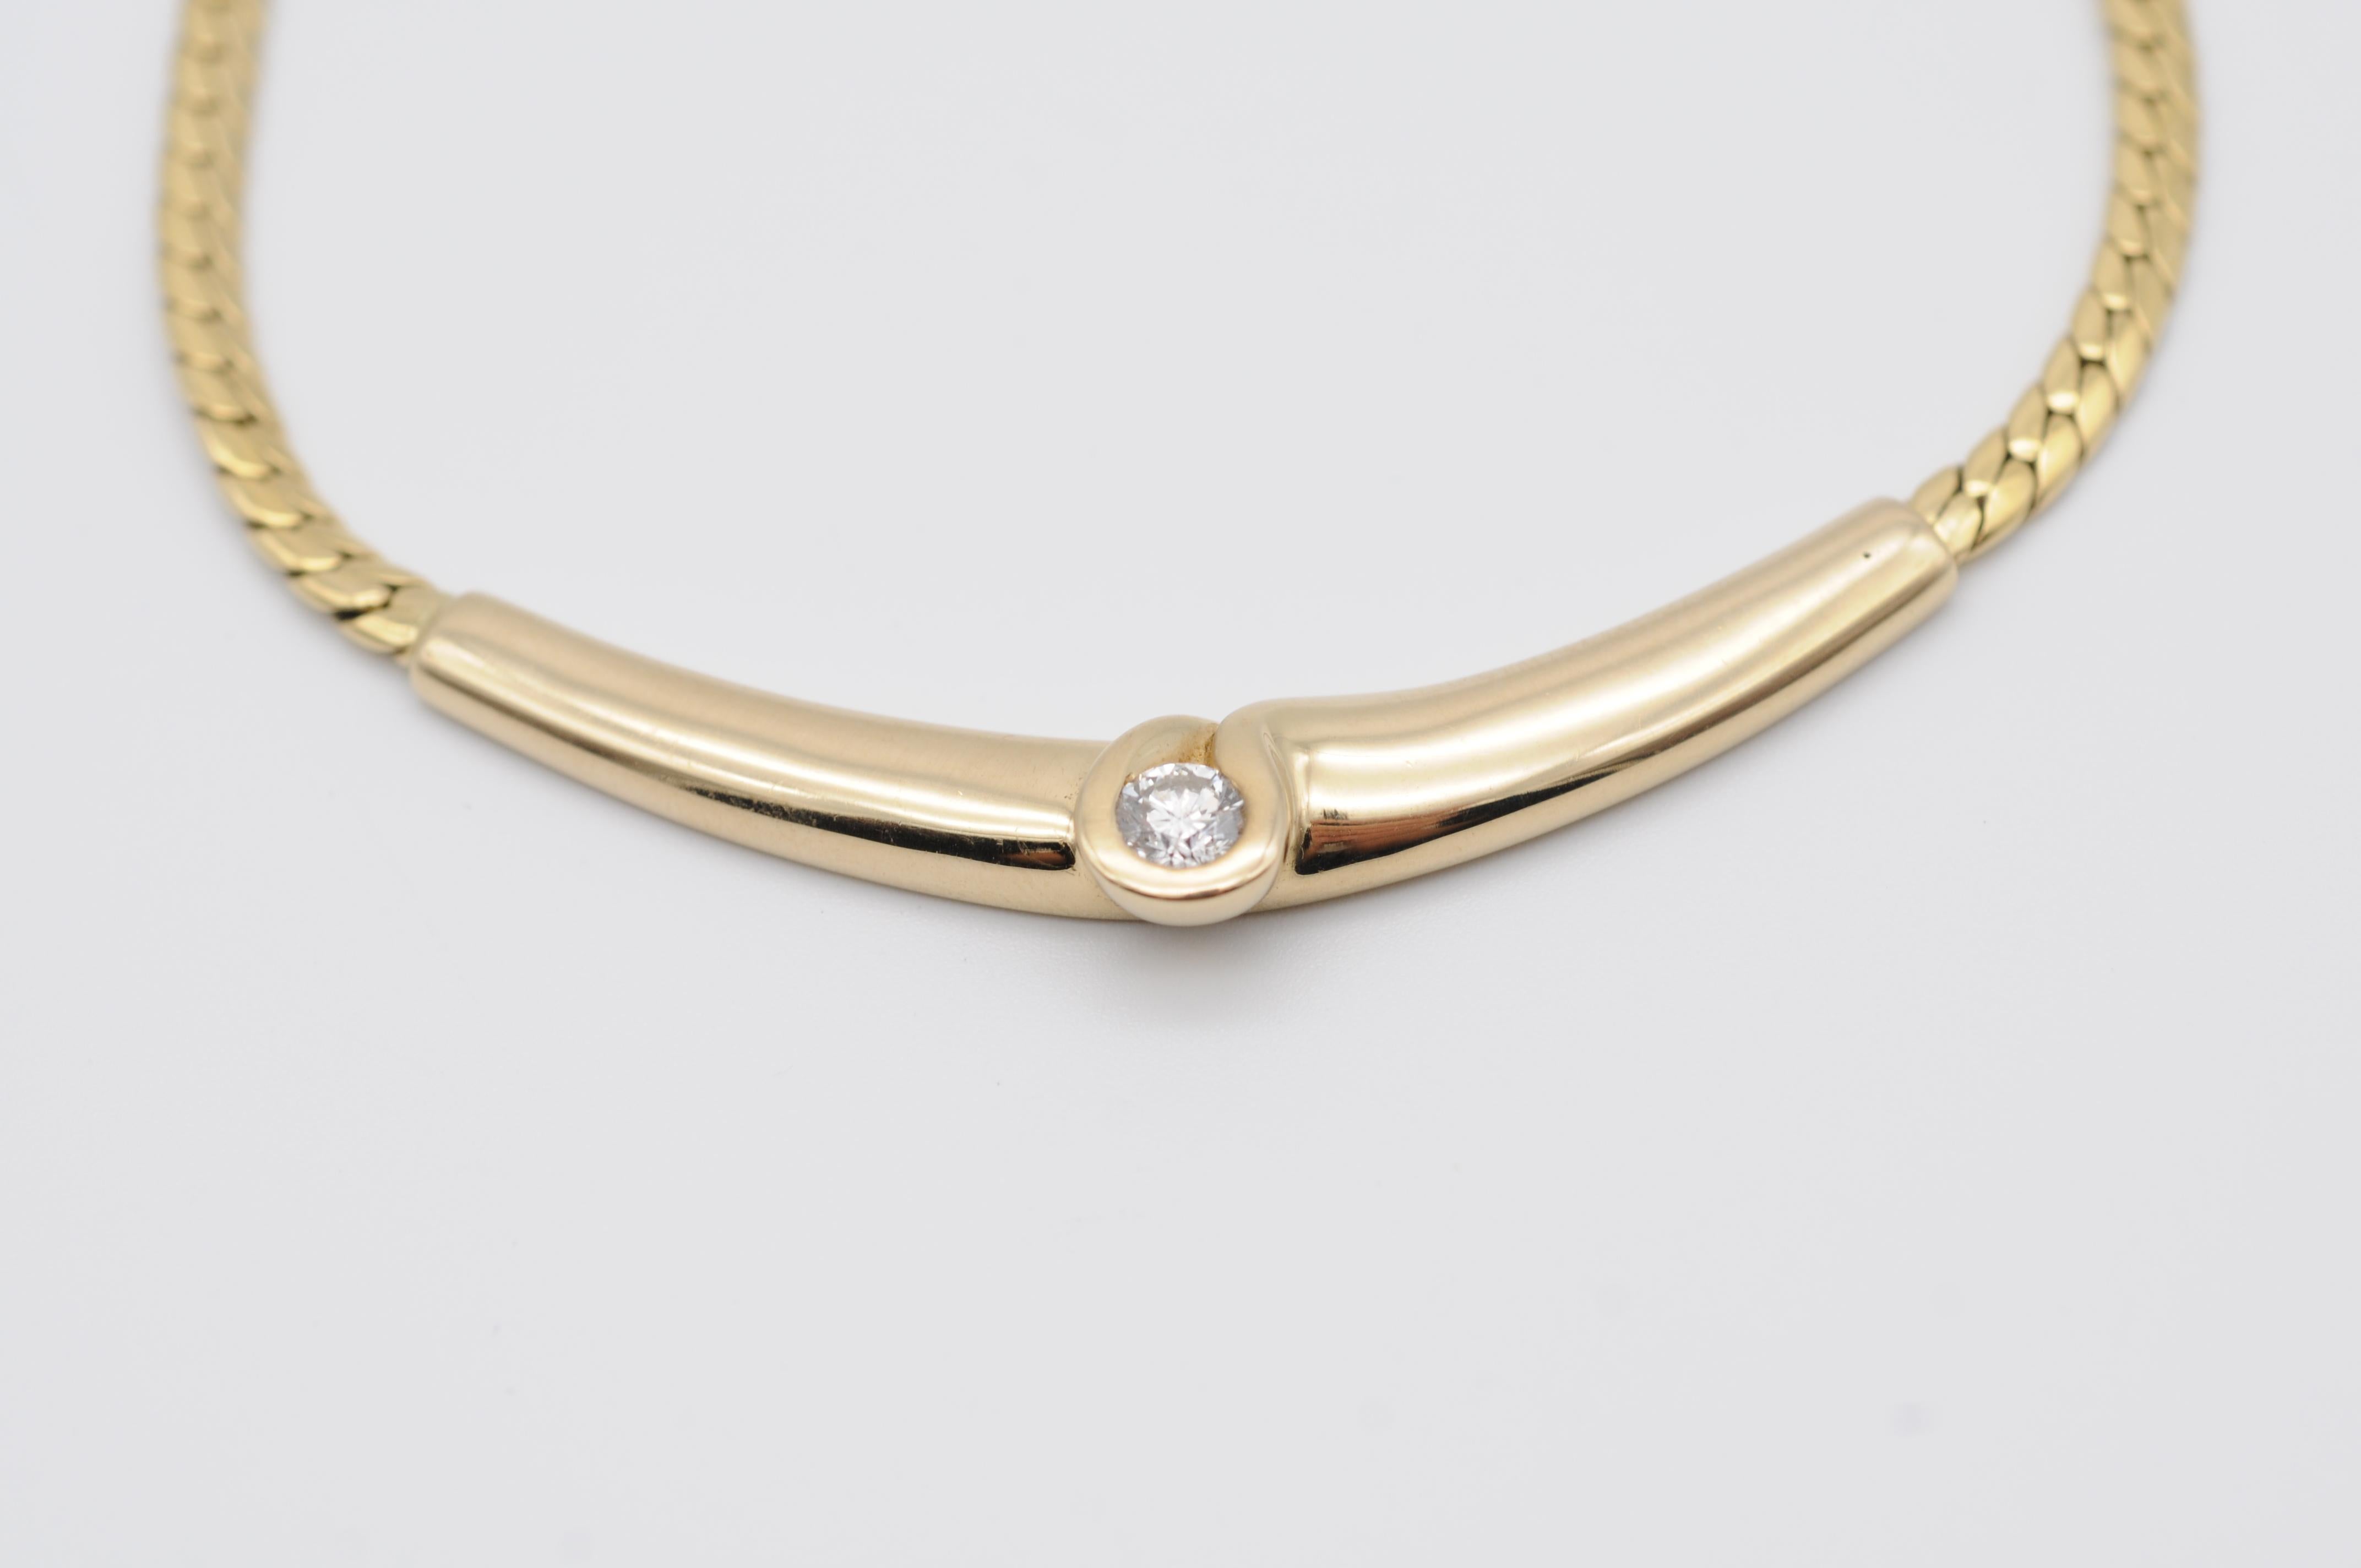 Brilliant Cut 14K yellow gold necklace / necklace with solitaire 0.25 carat diamond For Sale